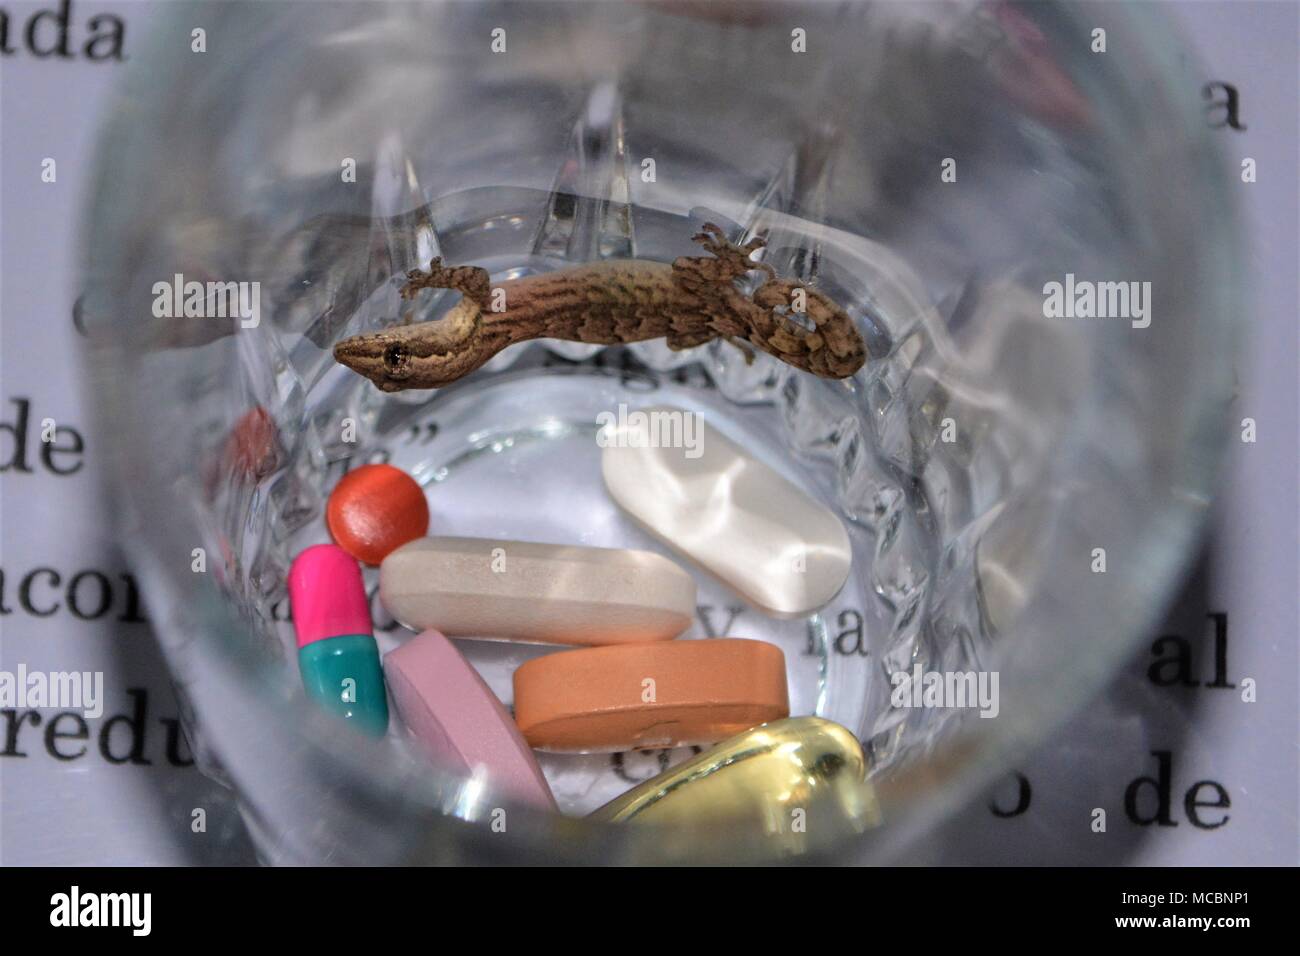 Morning surprise with Galapagos Gecko found in the vitamin jar Stock Photo